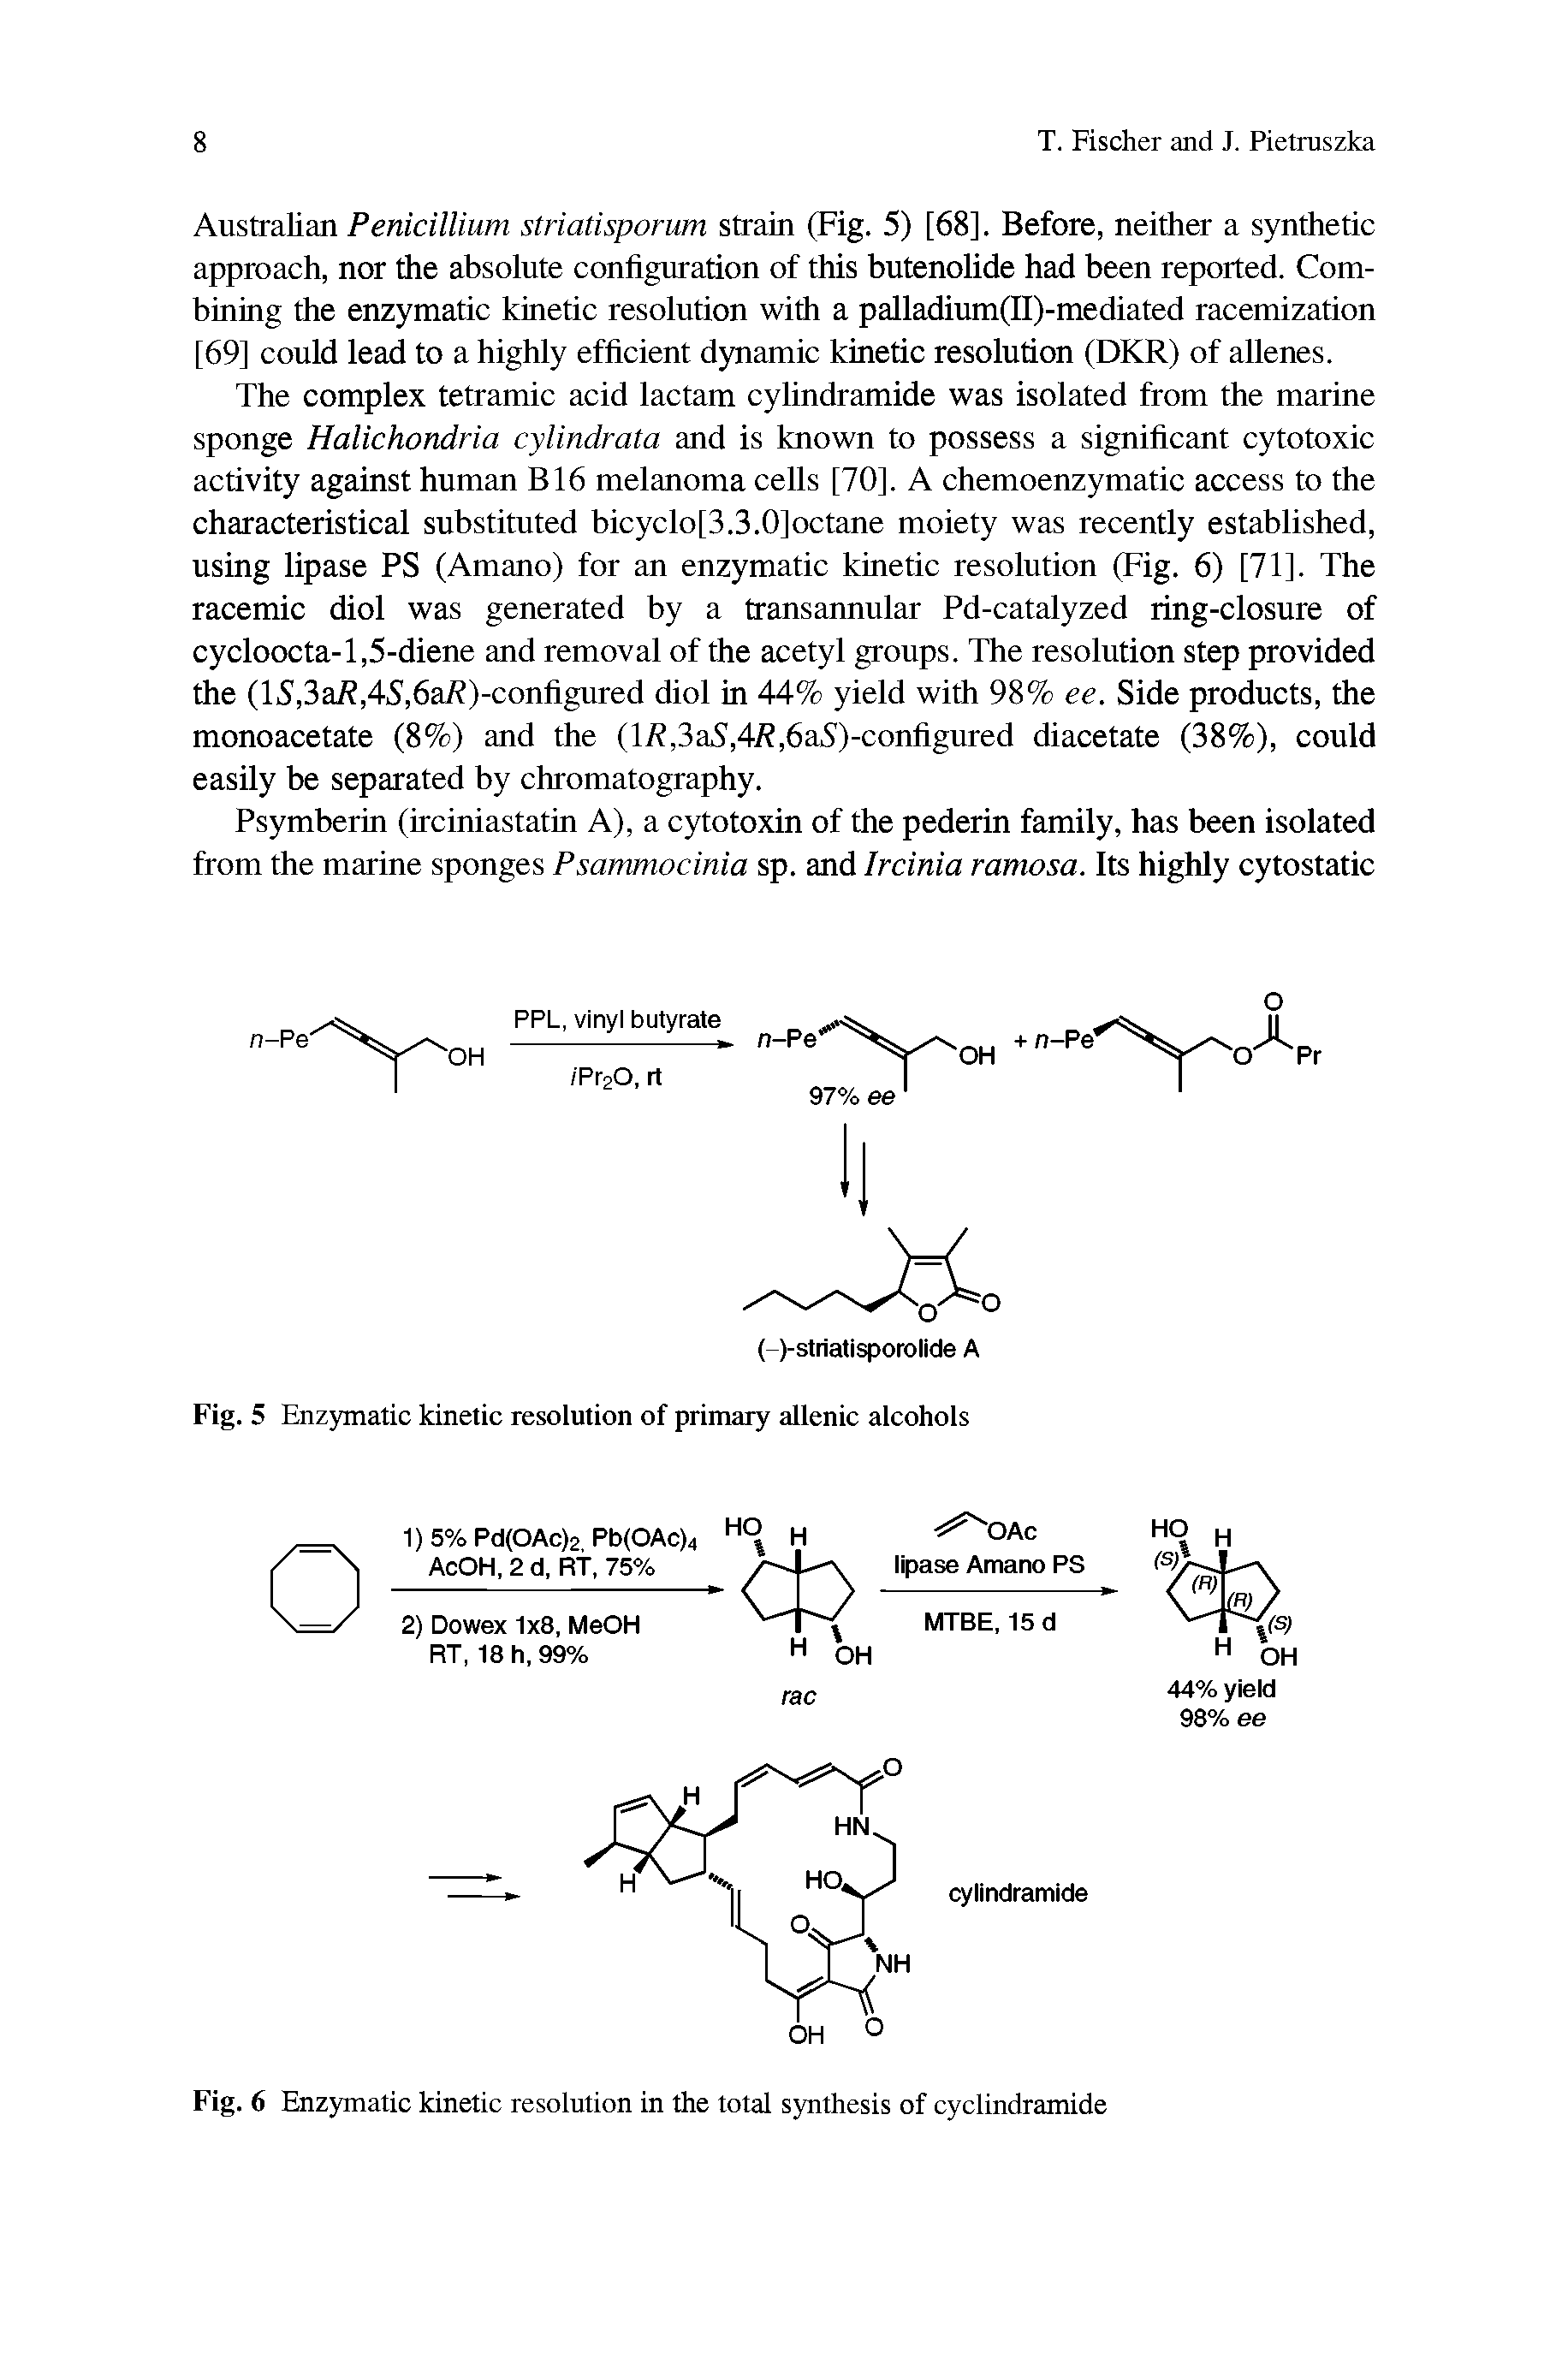 Fig. 5 Enzymatic kinetic resolution of primary allenic alcohols...